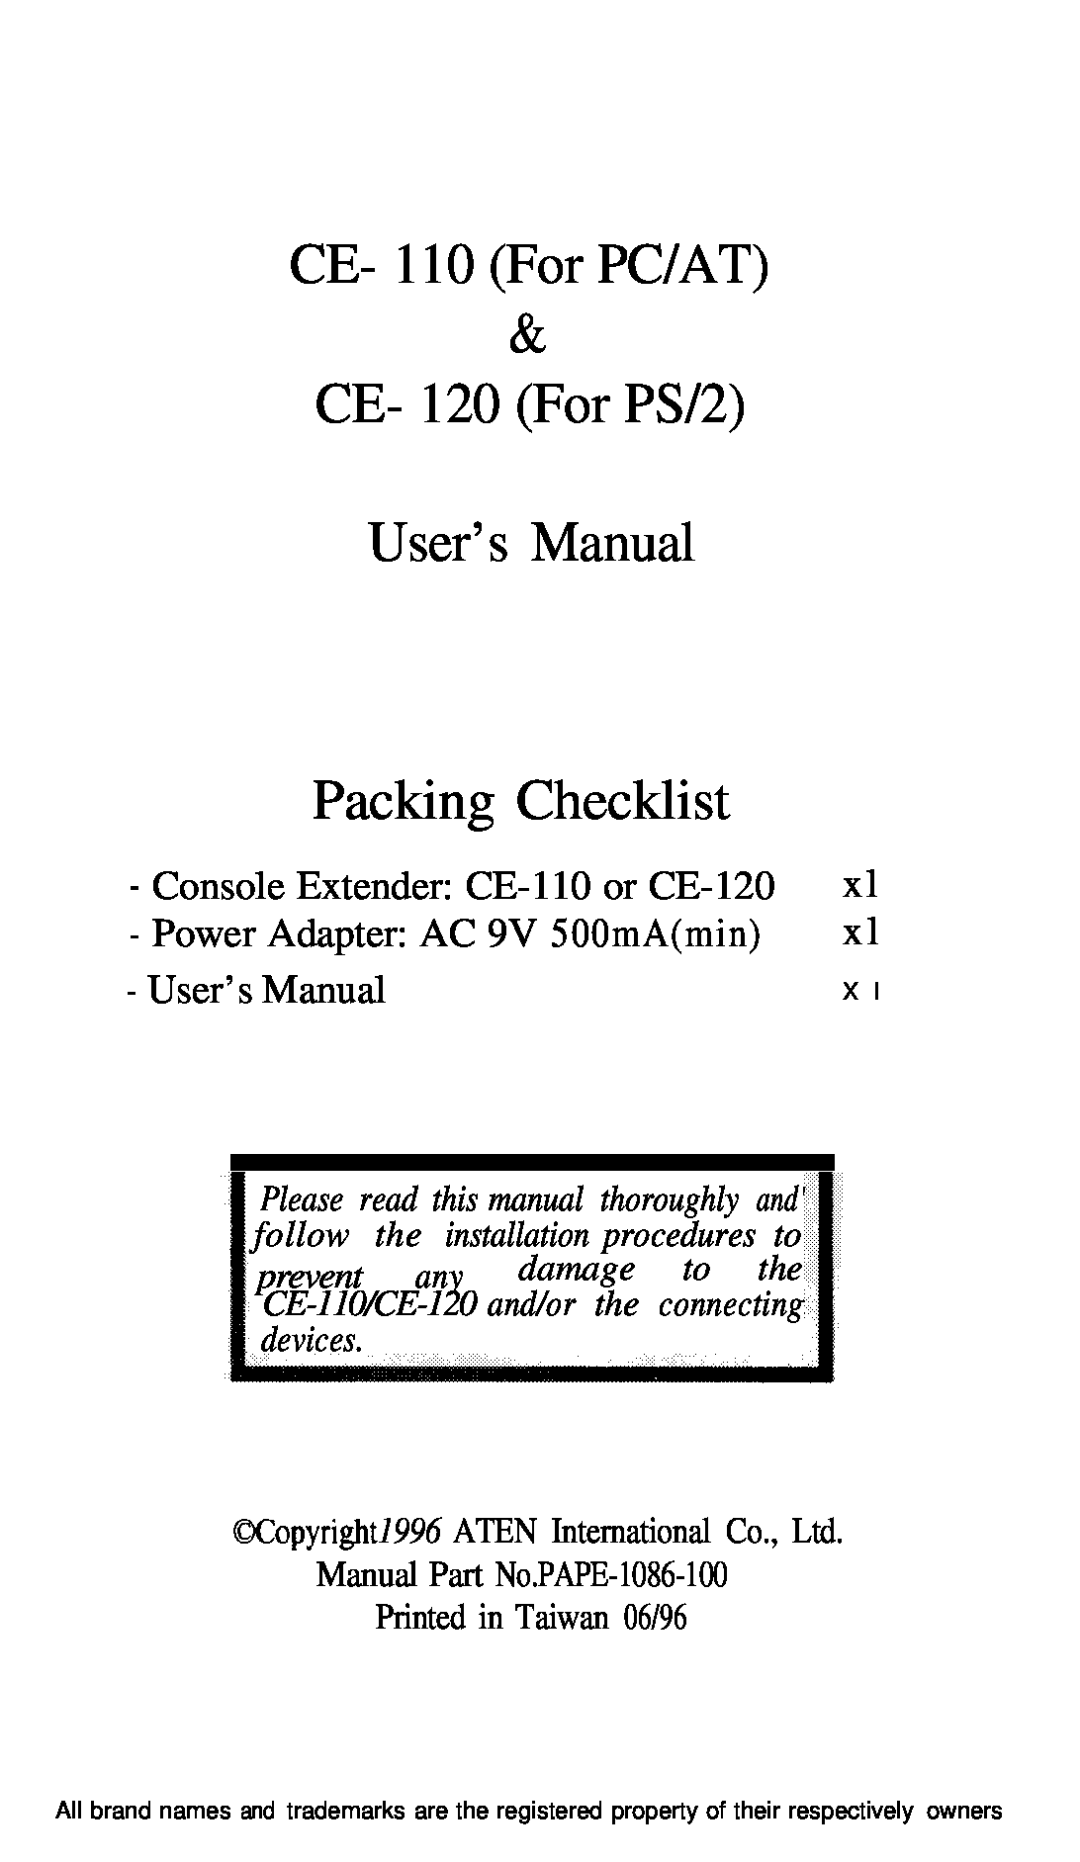 ATEN Technology user manual CE- 110 For PC/AT & CE- 120 For PS/2, User’s Manual Packing Checklist, xl x l, devices 